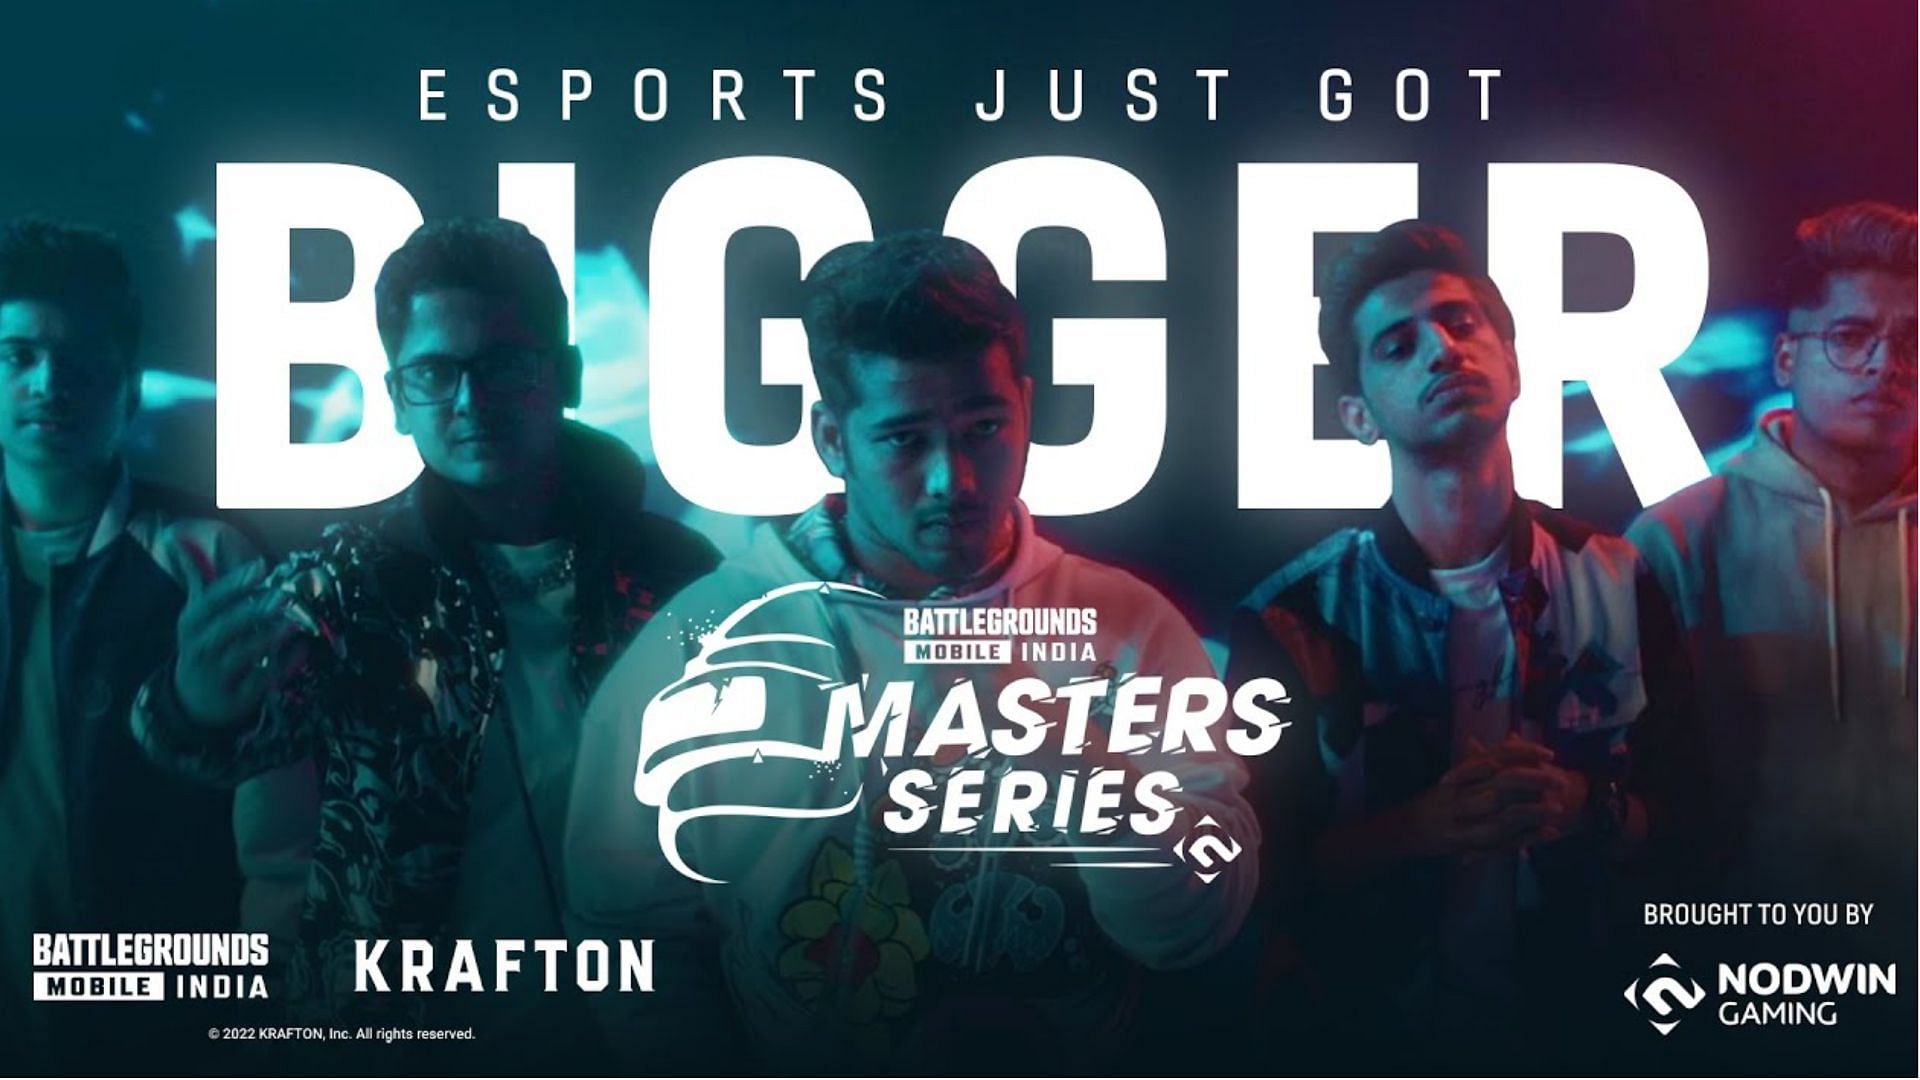 BGMI Masters Series 2022 has created a huge buzz in the gaming community (Image via Nodwin Gaming)